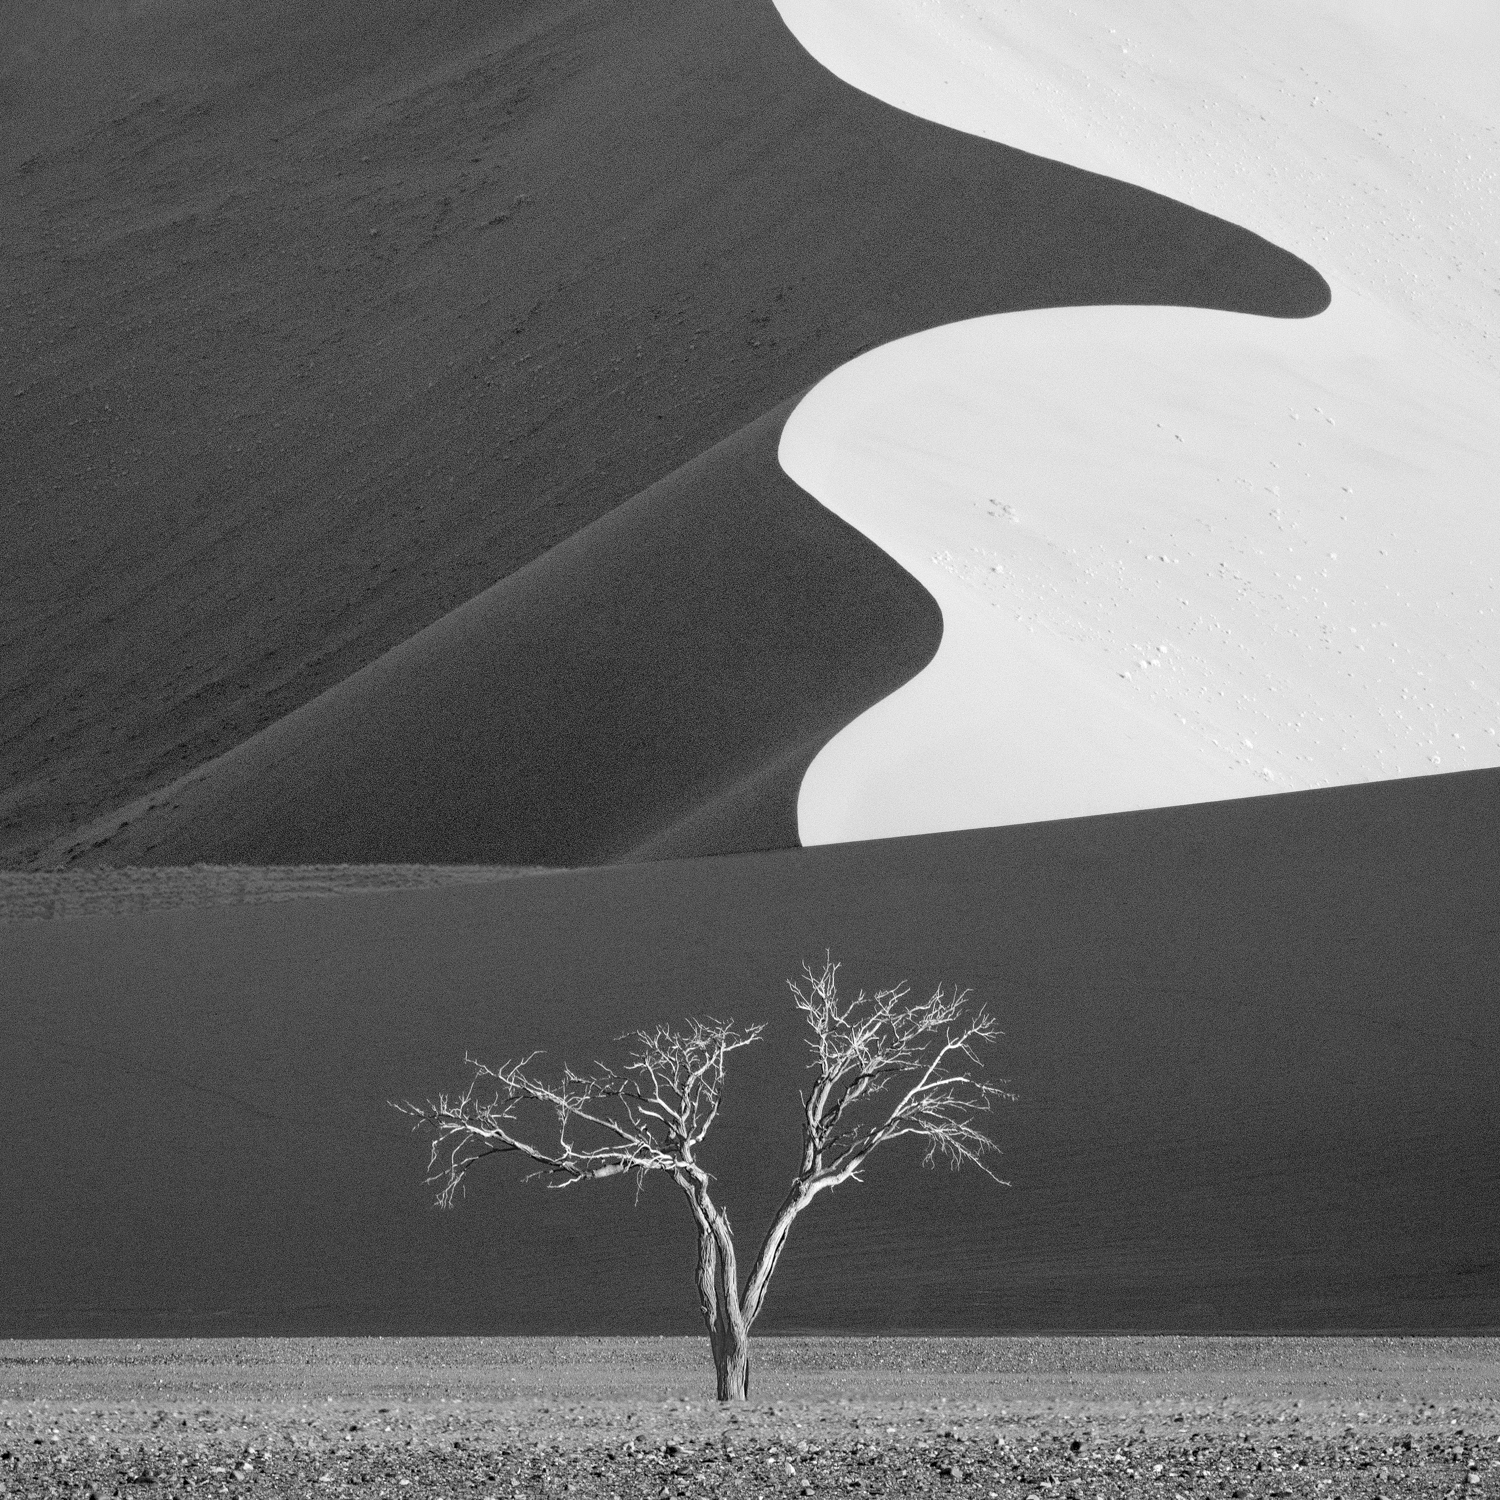 The yin-and-yang dune and the tree